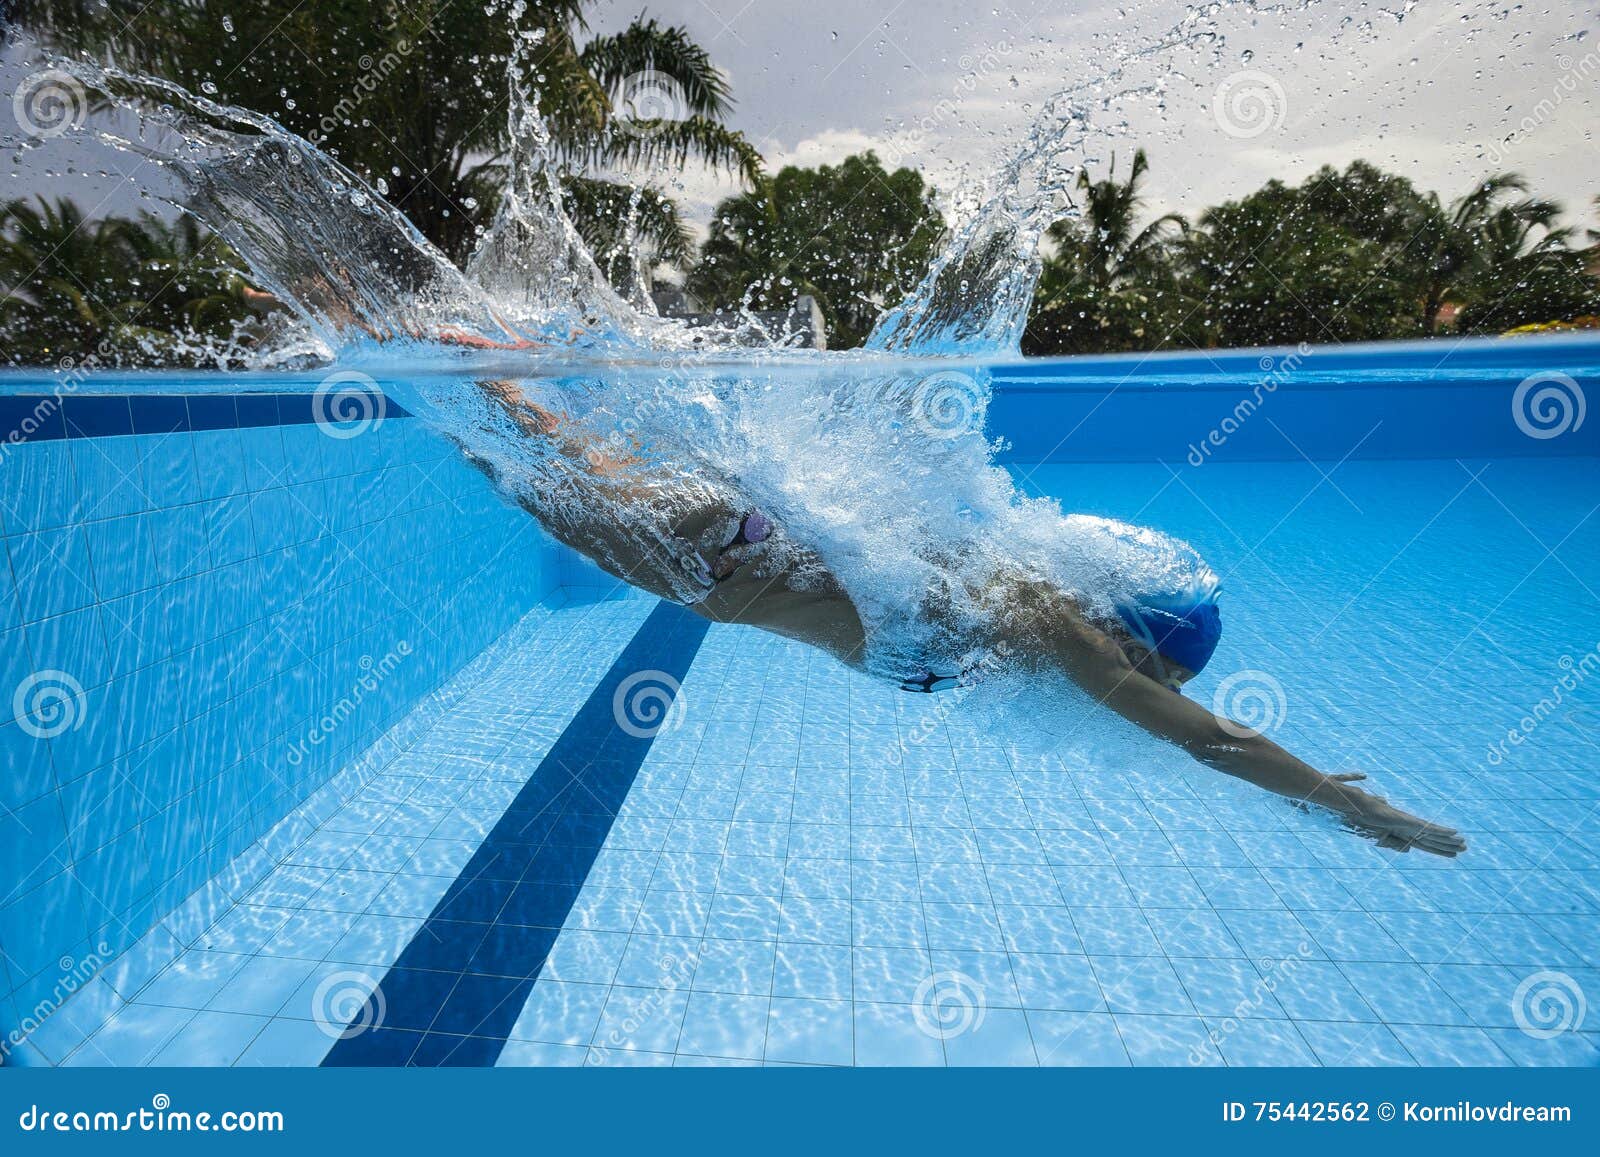 diving into swimming pool